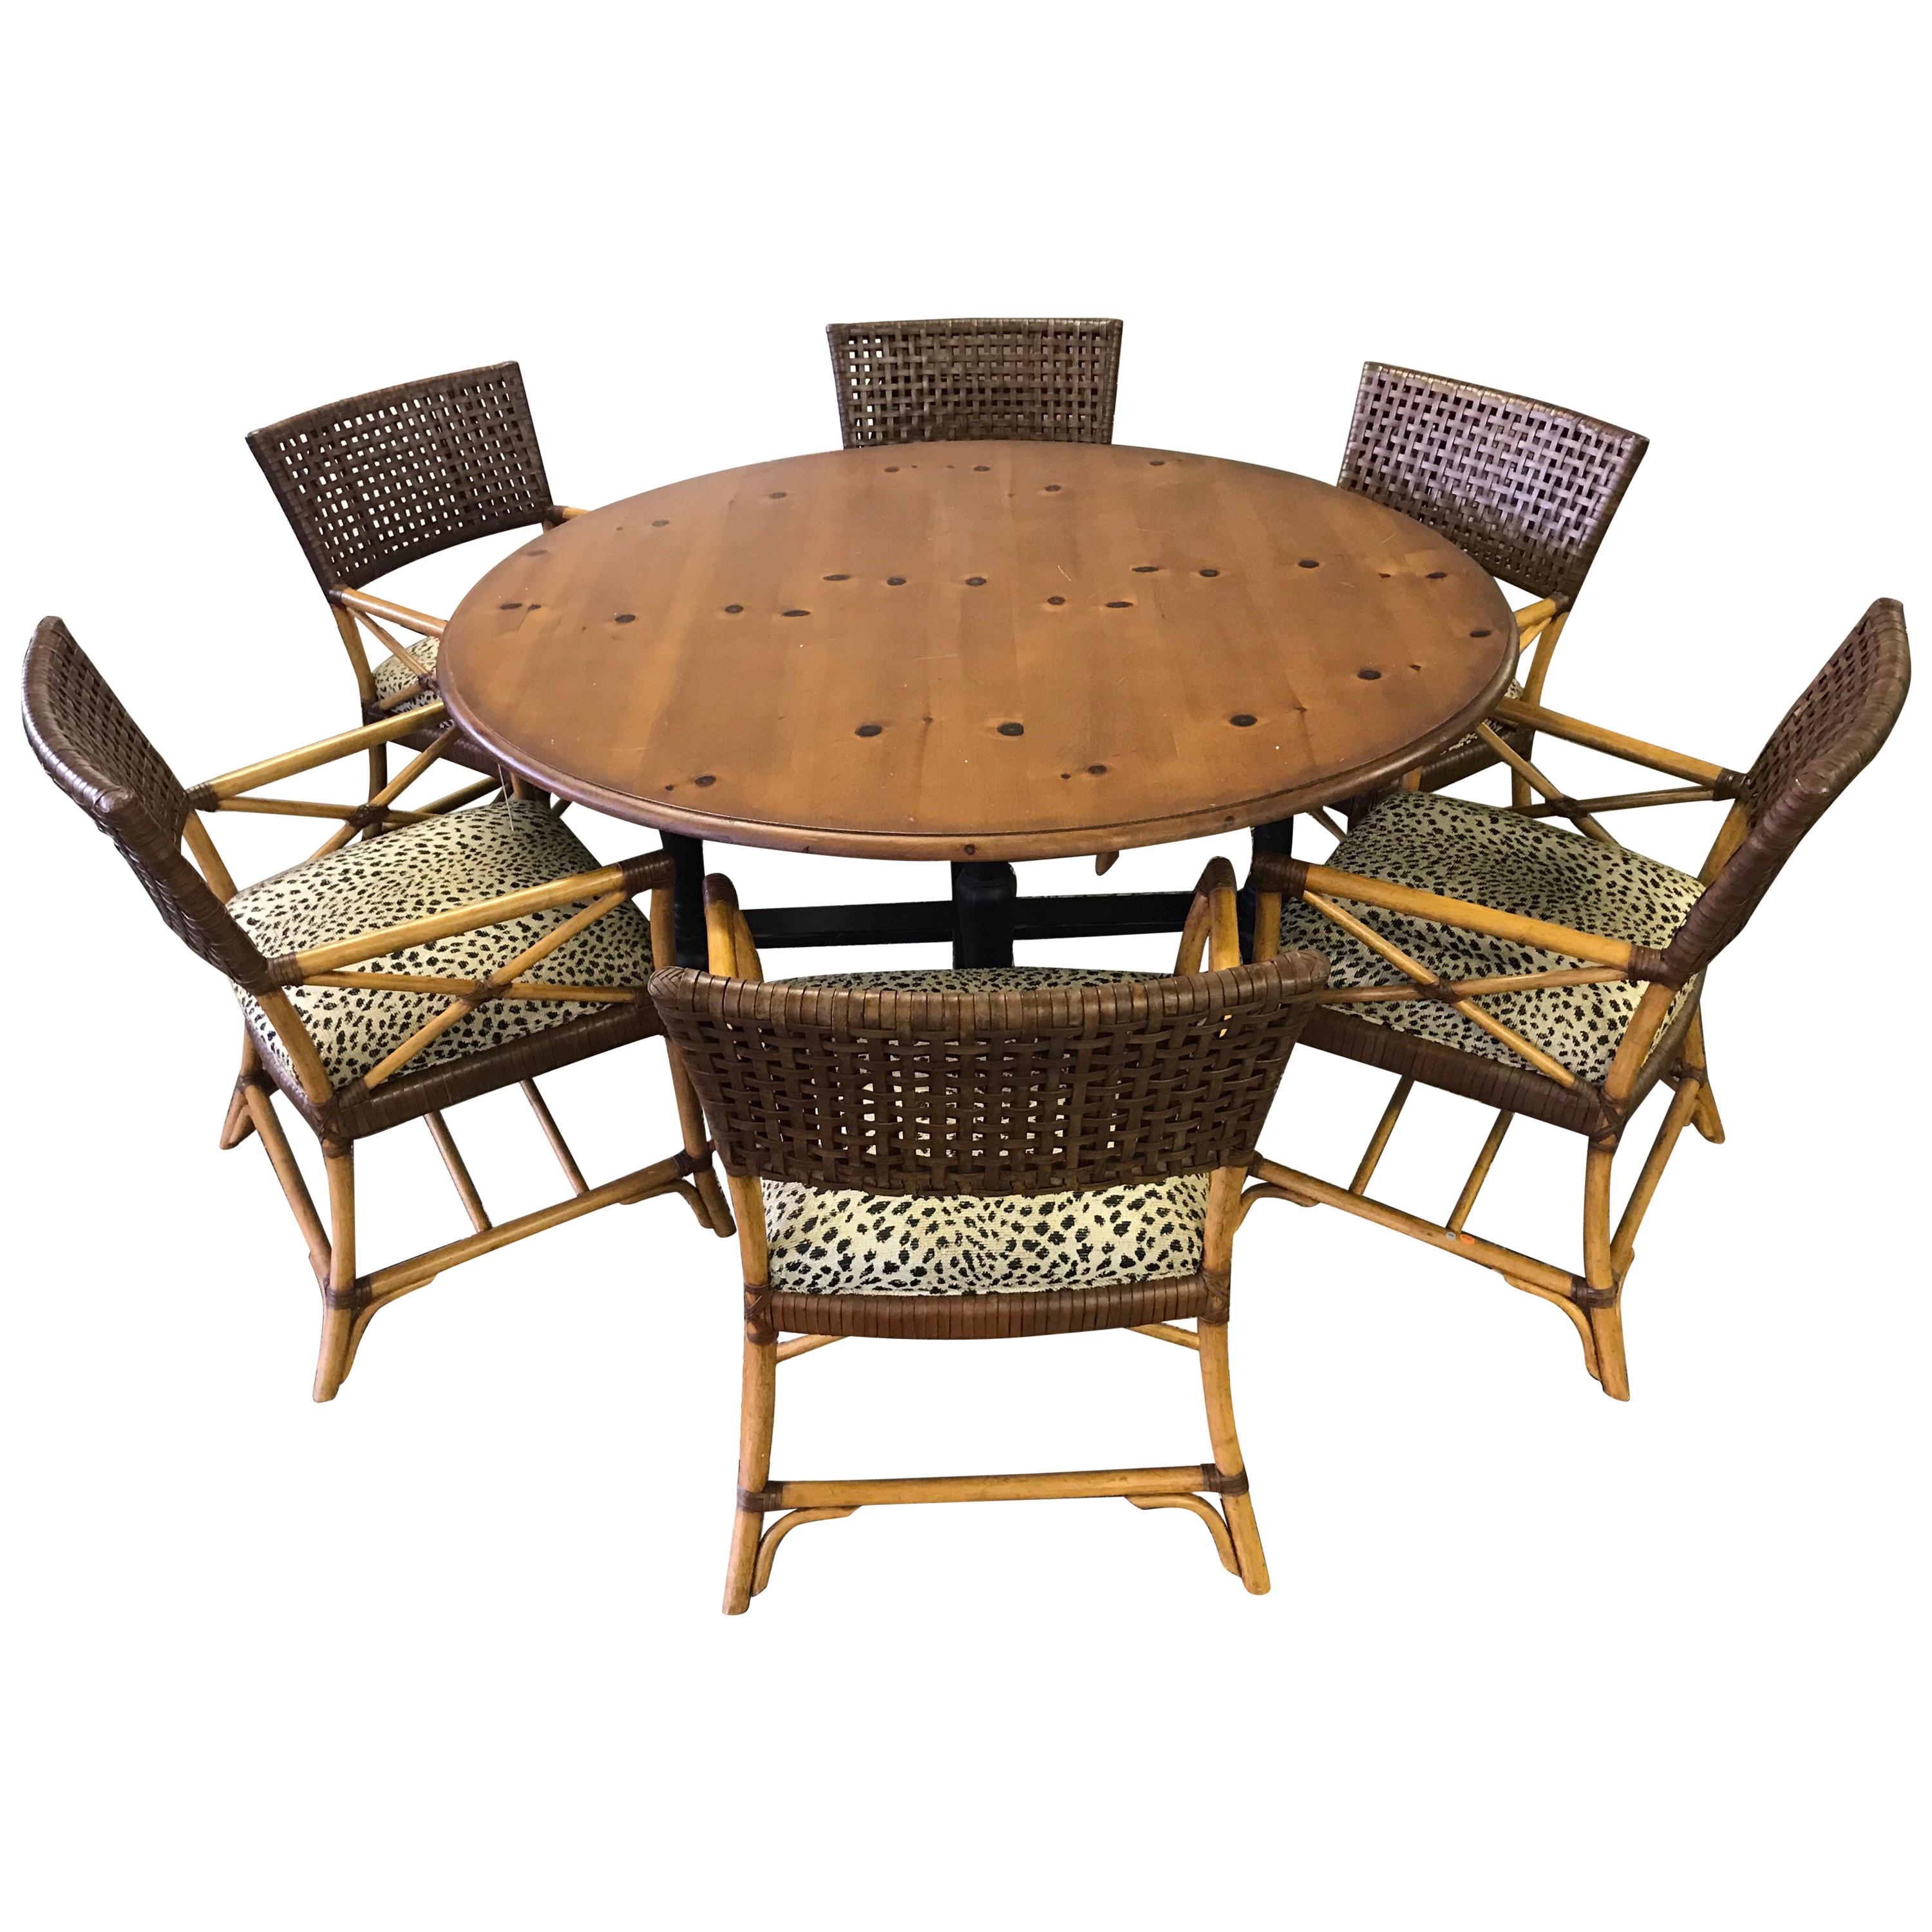 Woven Leather and Bamboo Dining Chairs with Round Wood Table